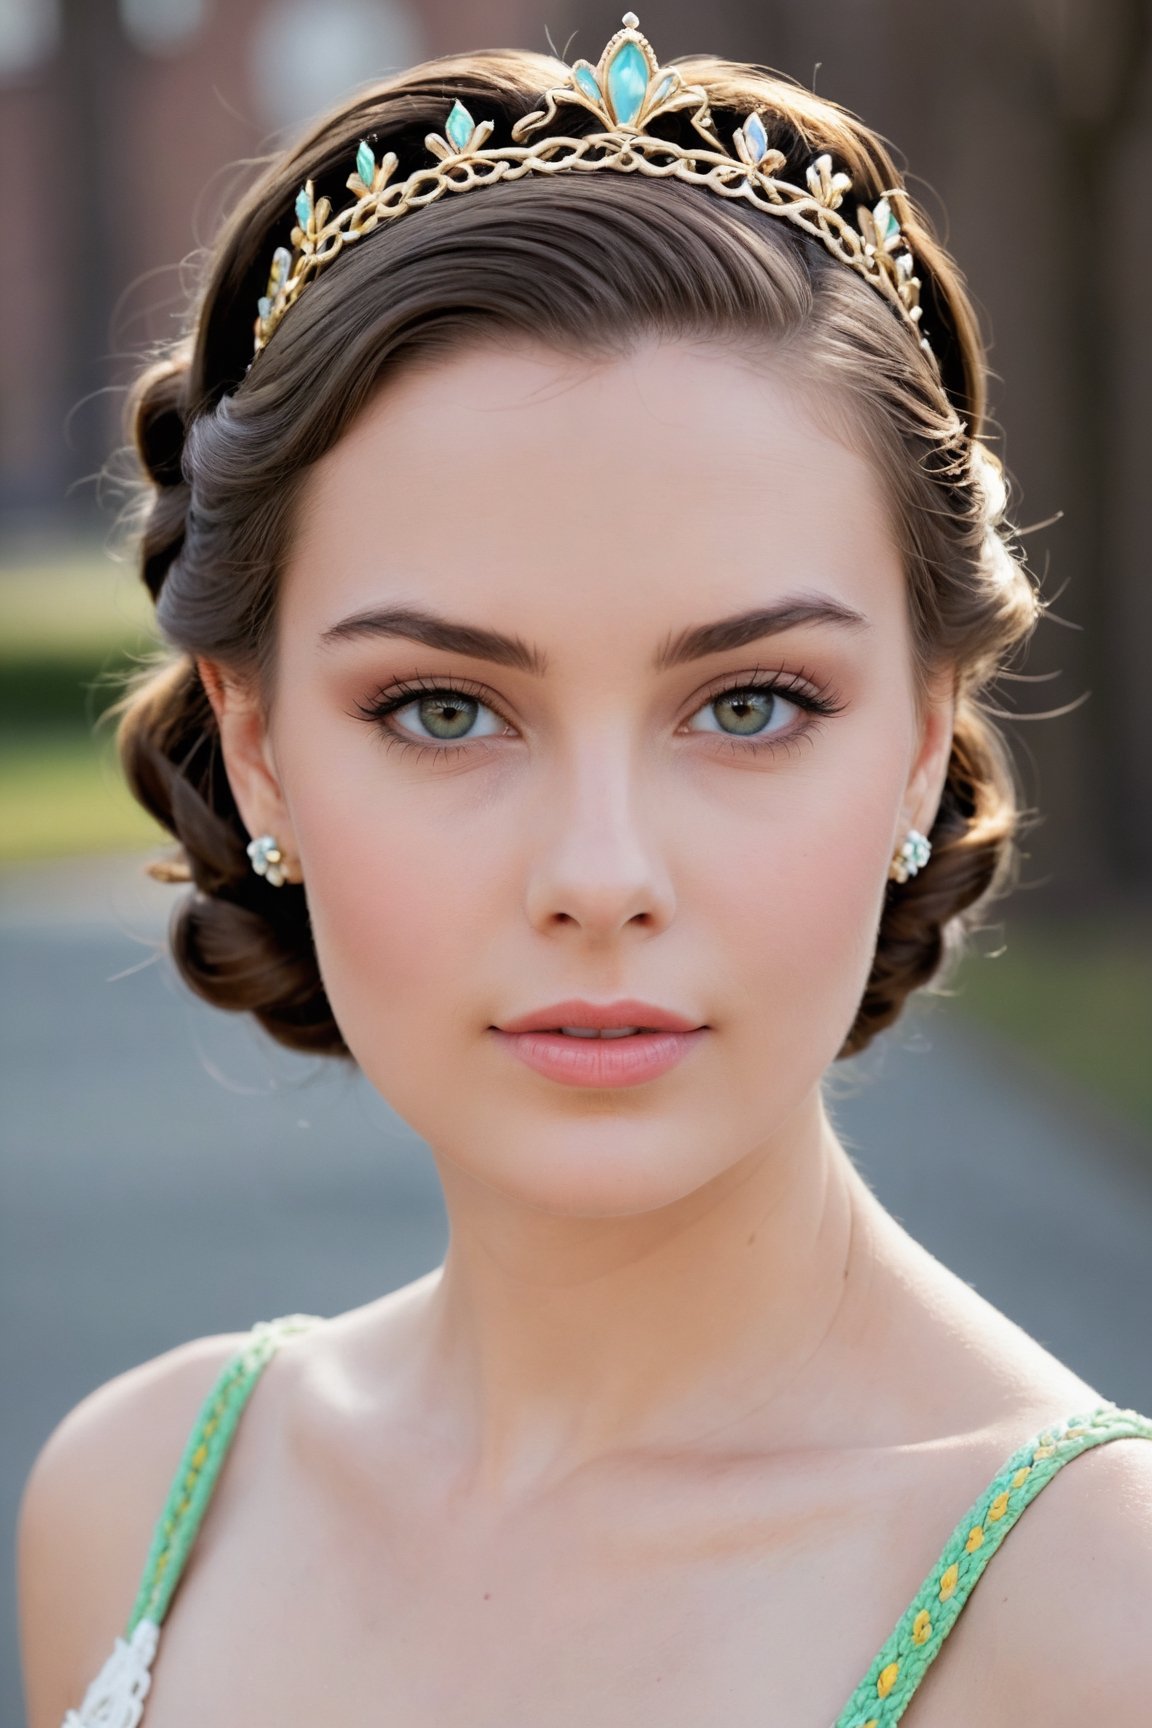 headshot,Nudity,Naked,Nude,No Clothes,Dark brown hair,face similar to Grace Kelly,Russian,pale skin,Crown braid Hairstyle,Colorful eyeshadow makeup,21 year old,Boyish_normal_breasts,headshot,Sunny Day Spring,Posing for a photo



